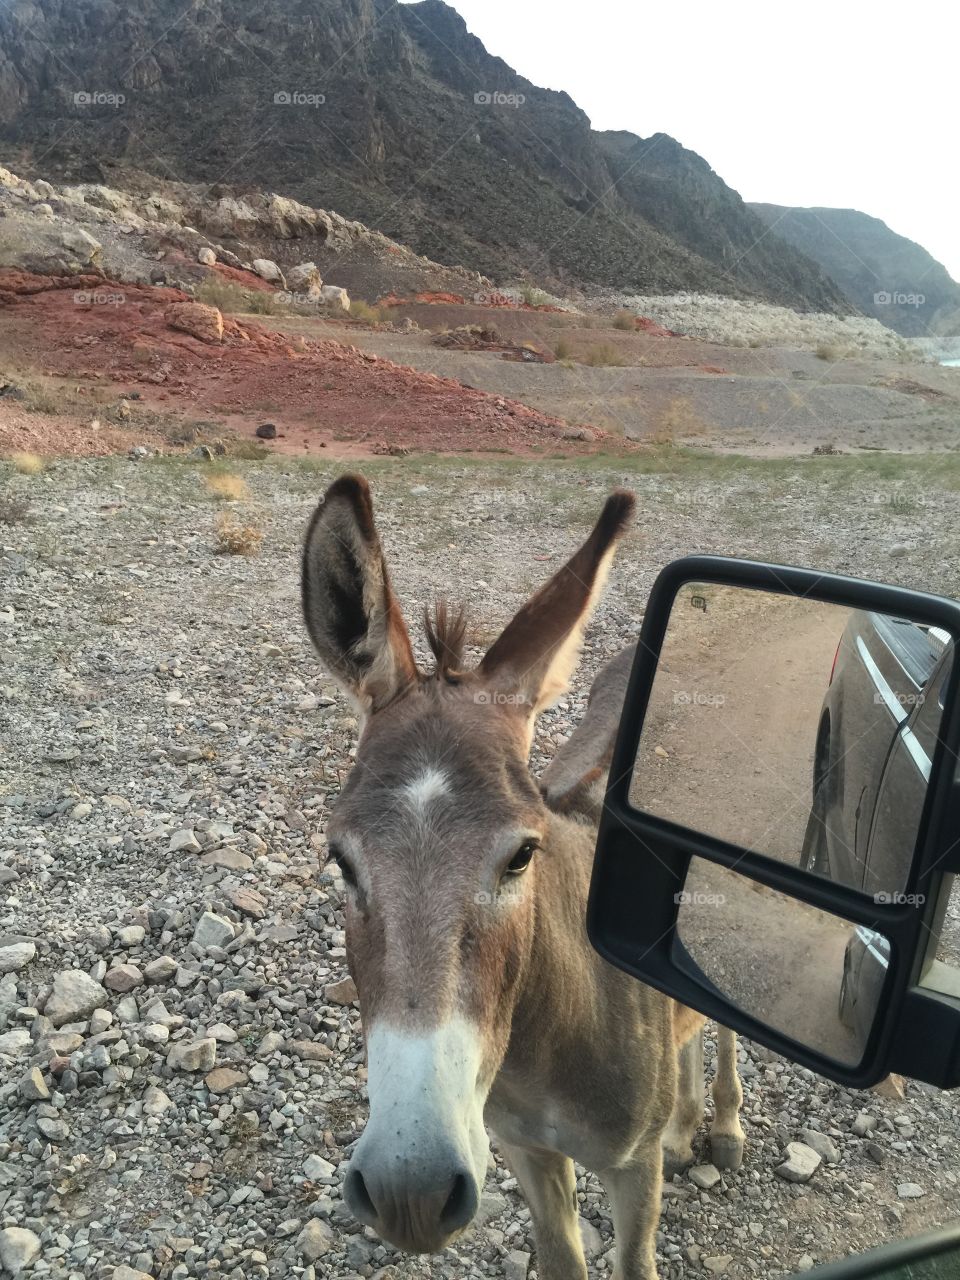 This wild burro approached our truck in the desert at Lake Mead, NV. 